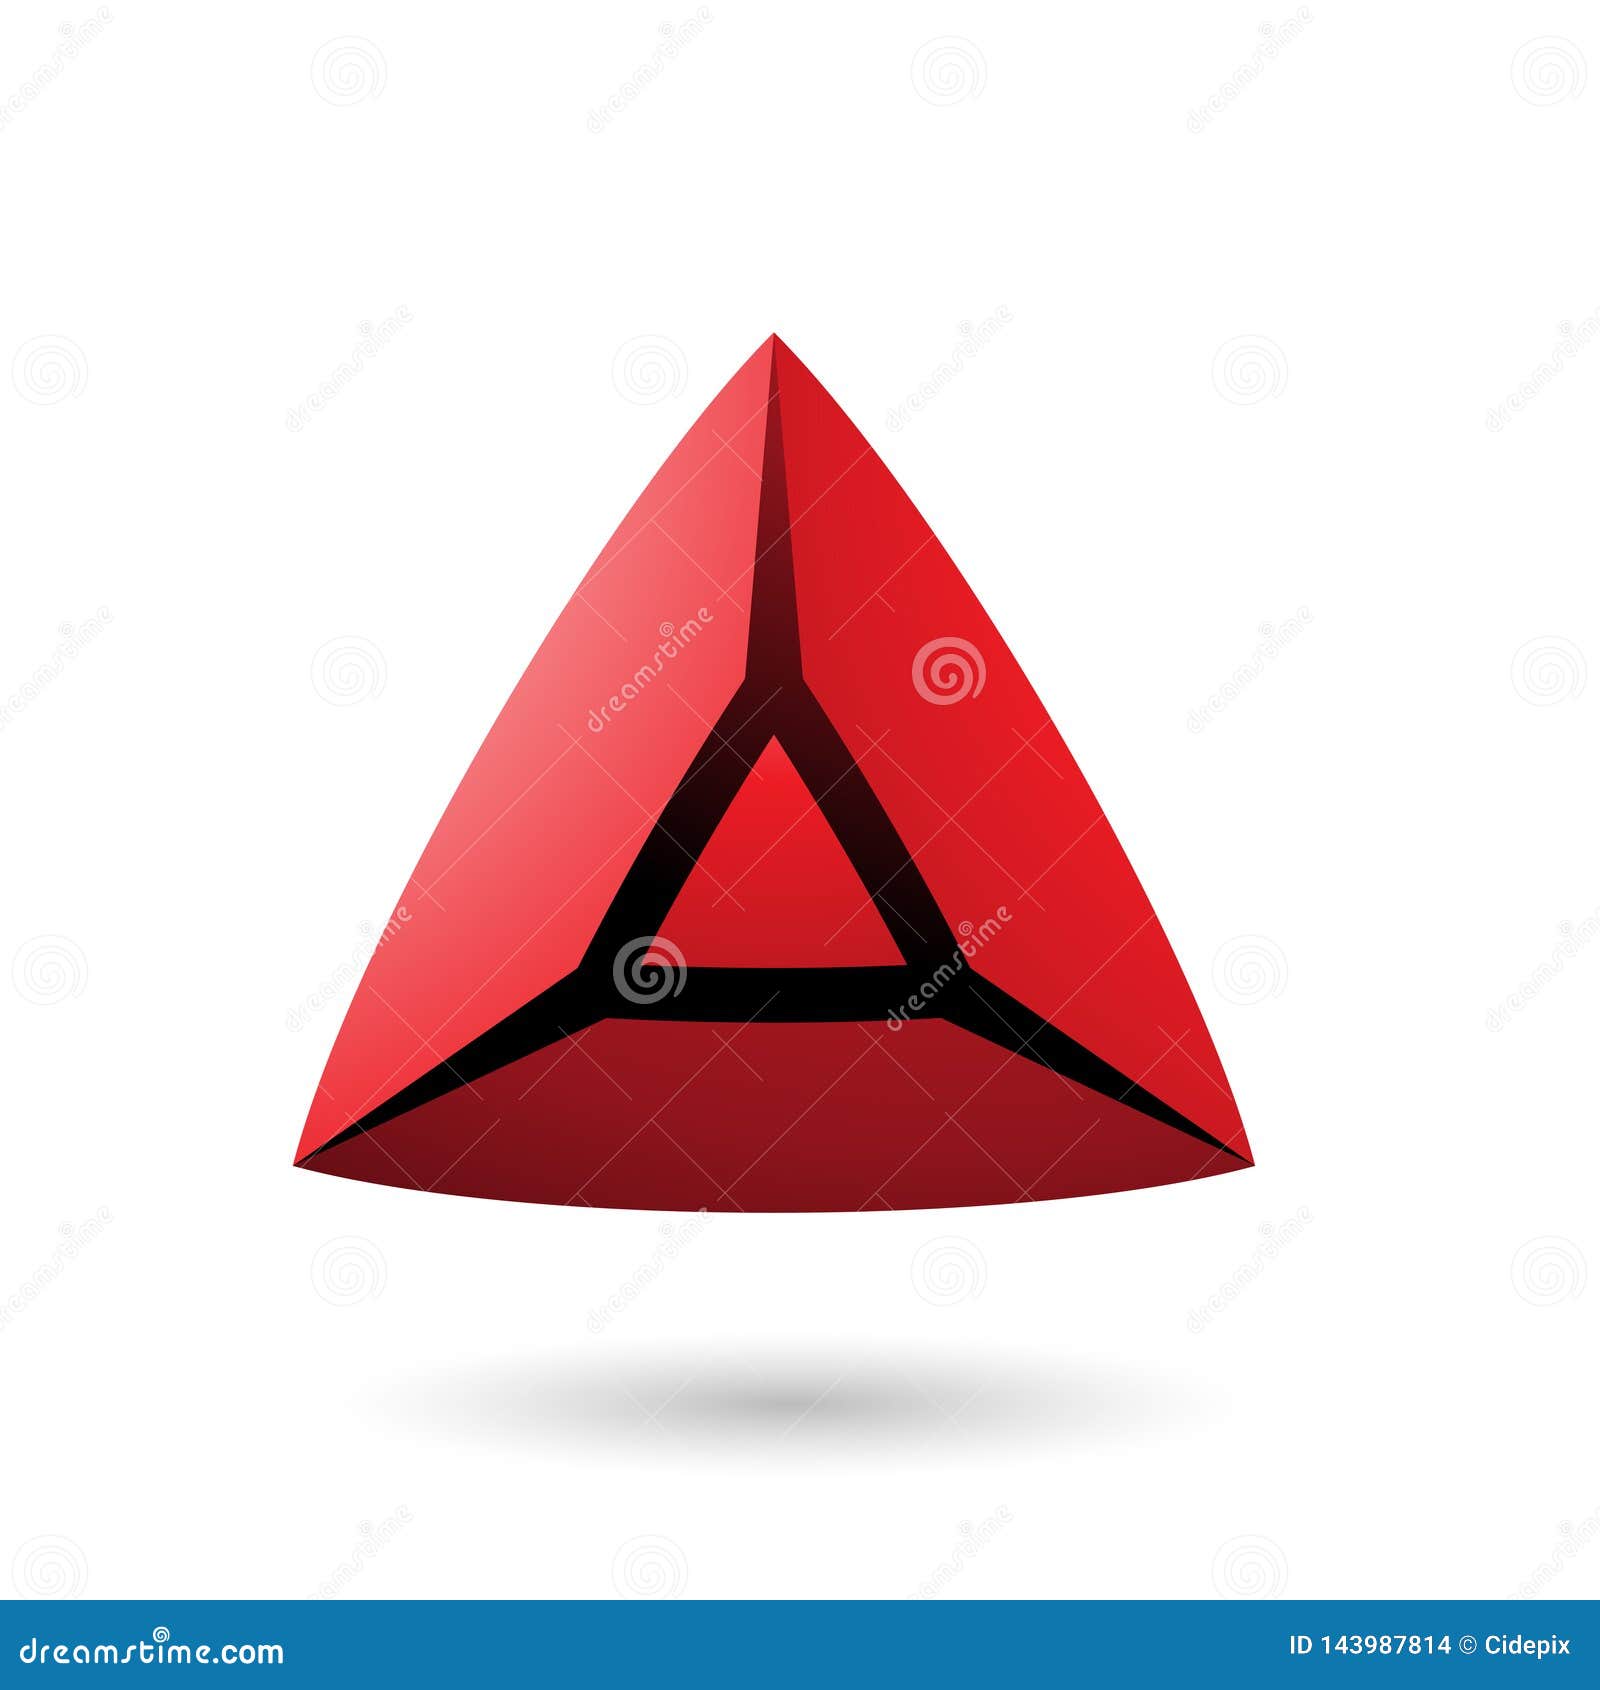 Red and Bold 3d Pyramid Vector Illustration Stock Vector - Illustration ...